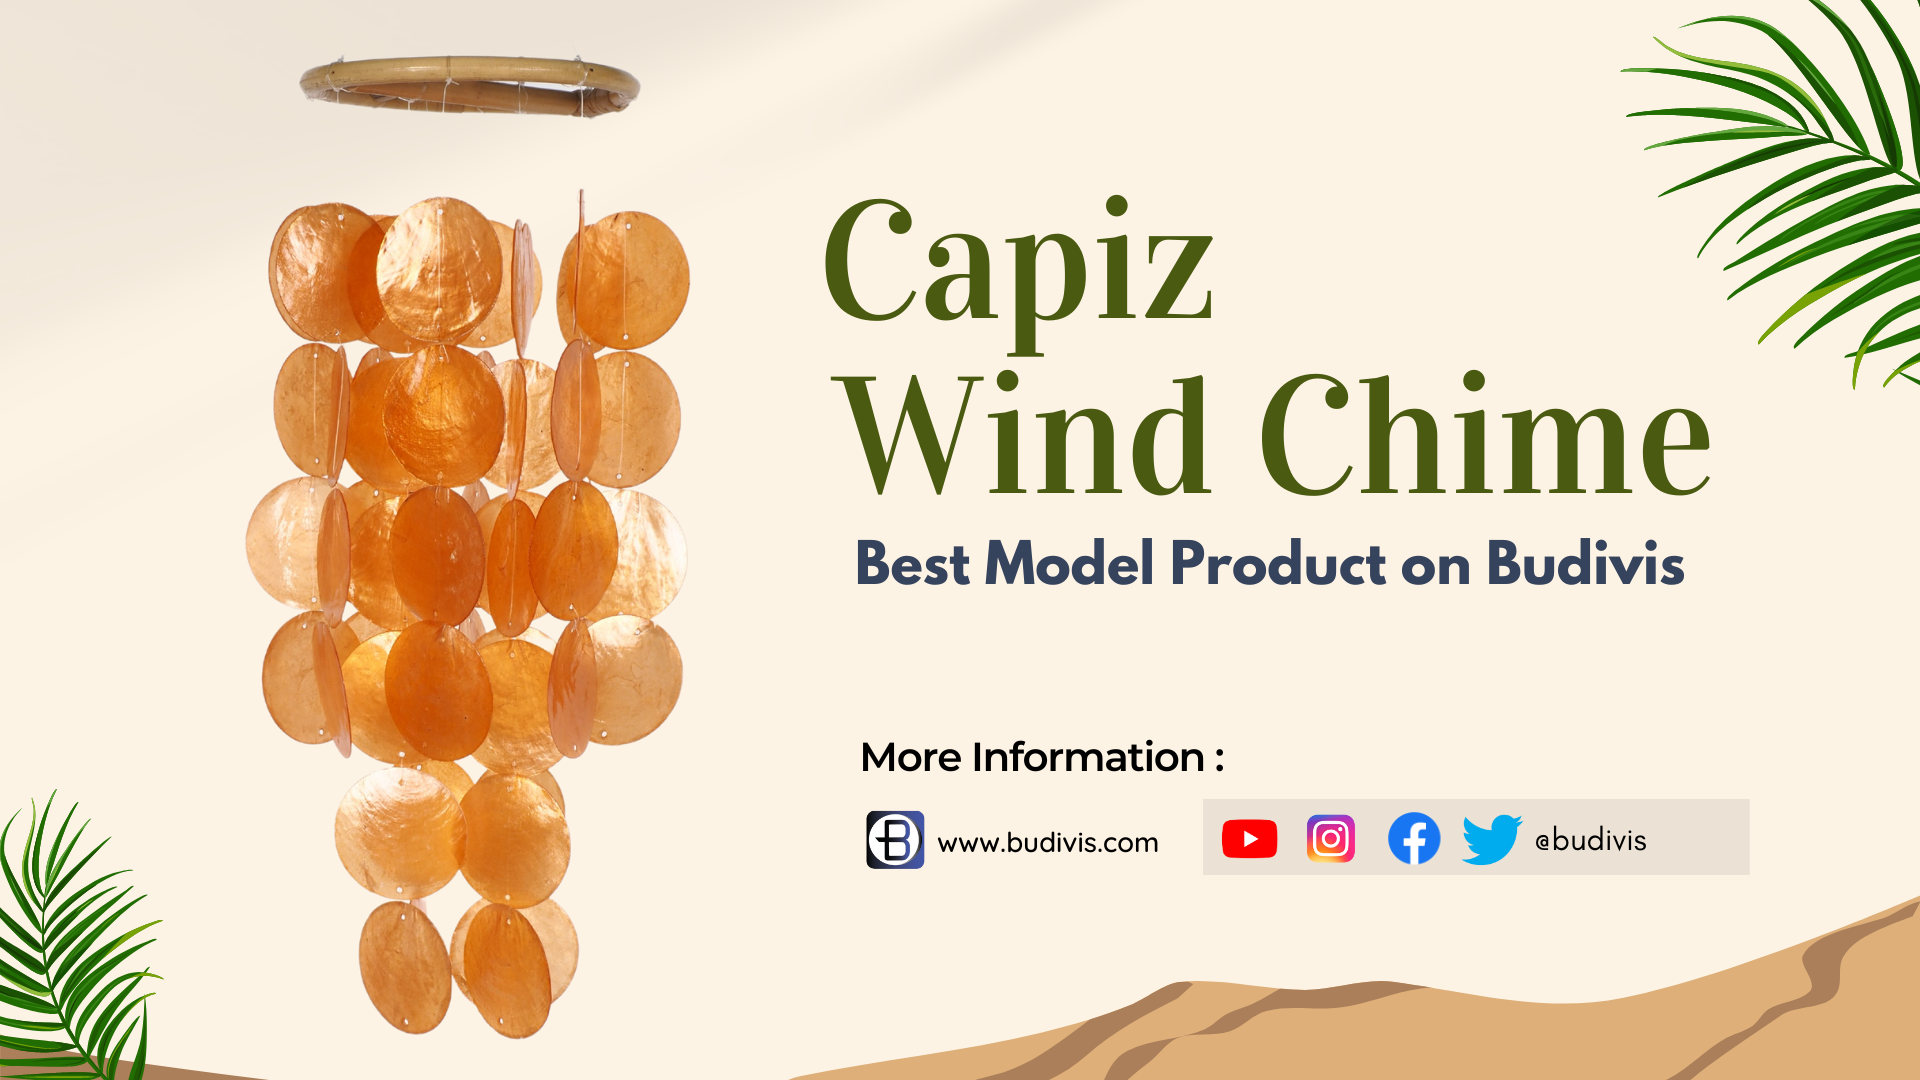 https://www.budivis.com/image/cache/catalog/A%20Blog/A%20blog%20pic/new/Capiz%20Wind%20Chime-1920x1080.png